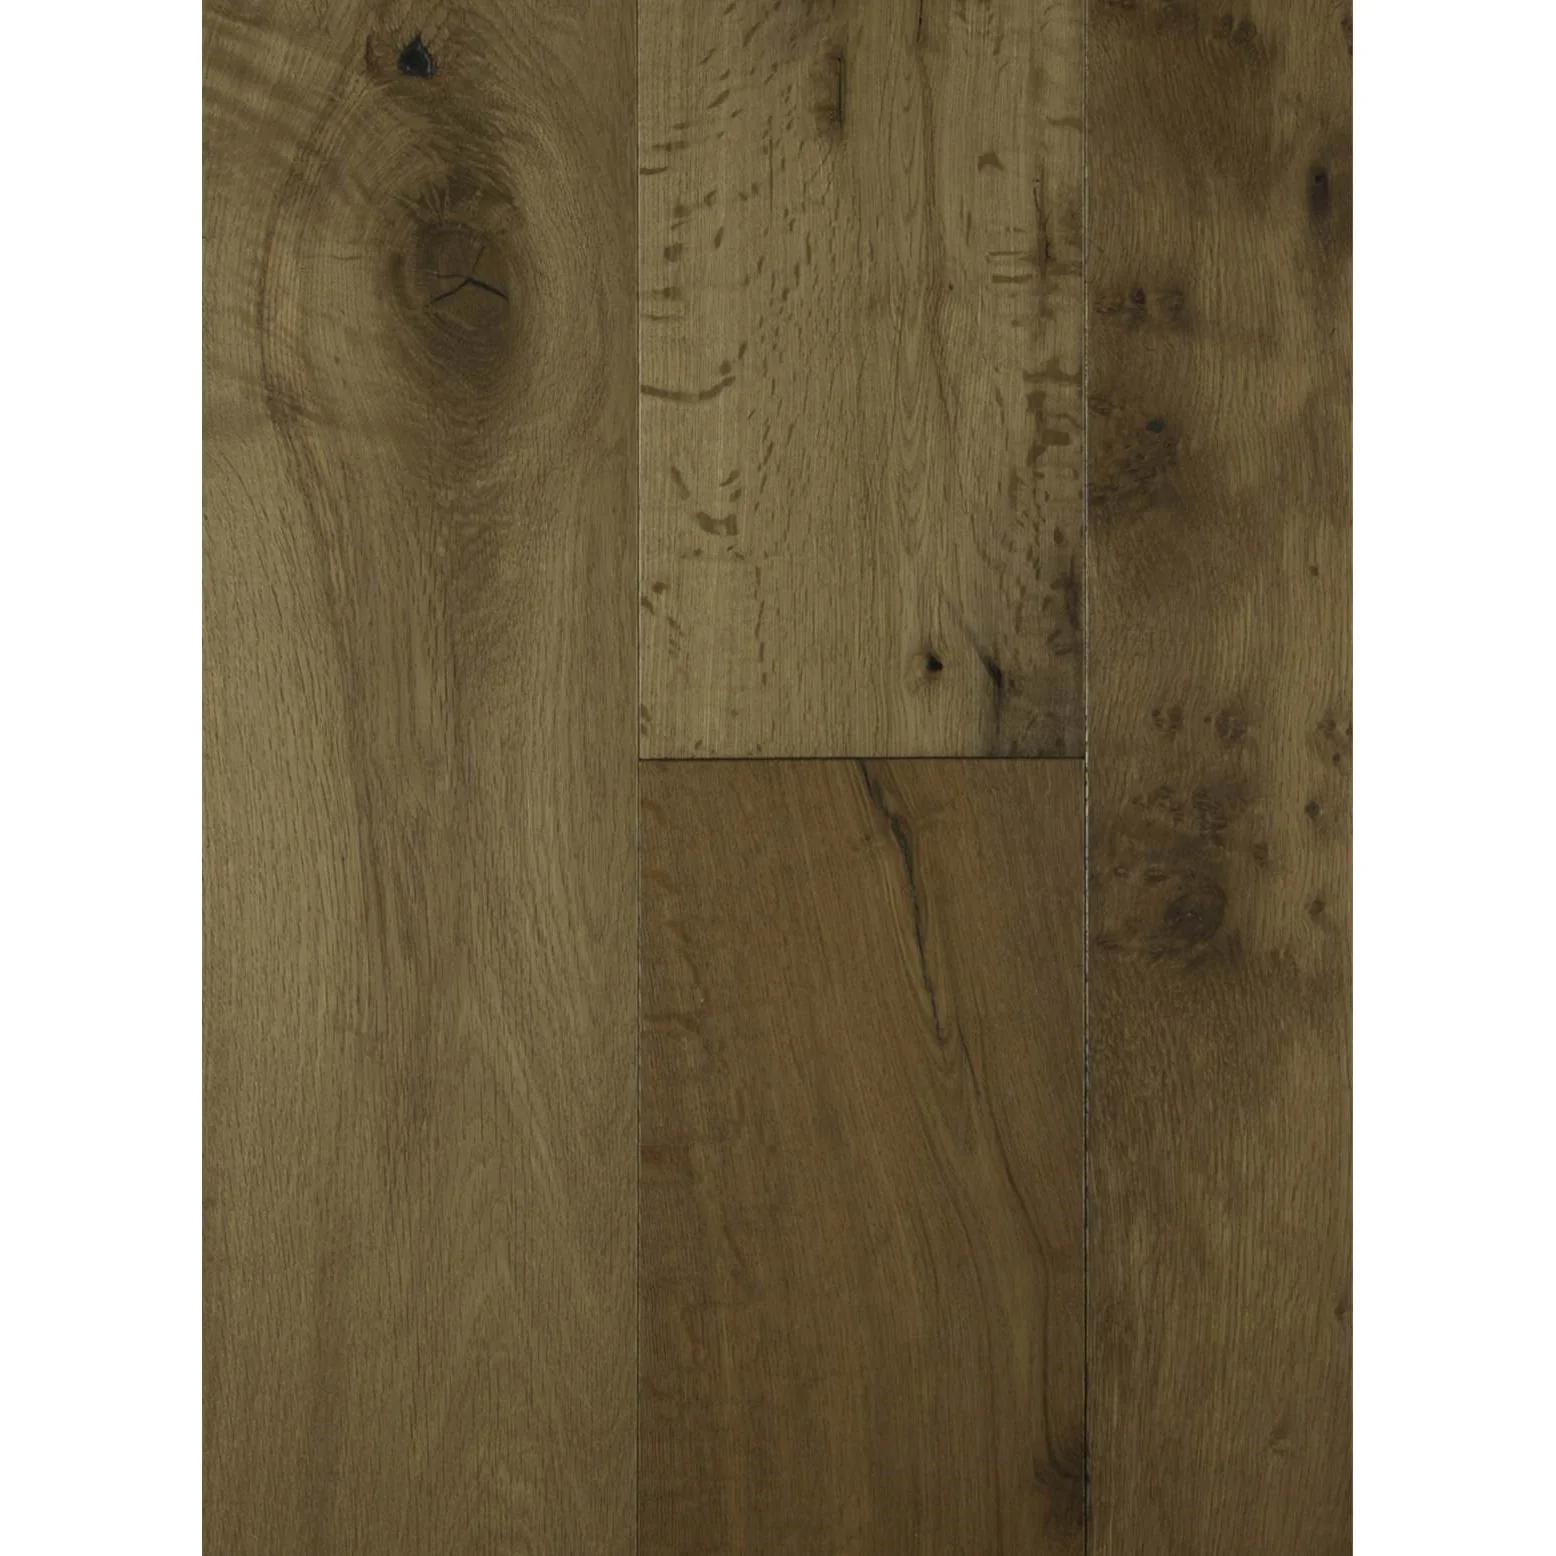 light smoked oak flooring - What is the lightest color hardwood